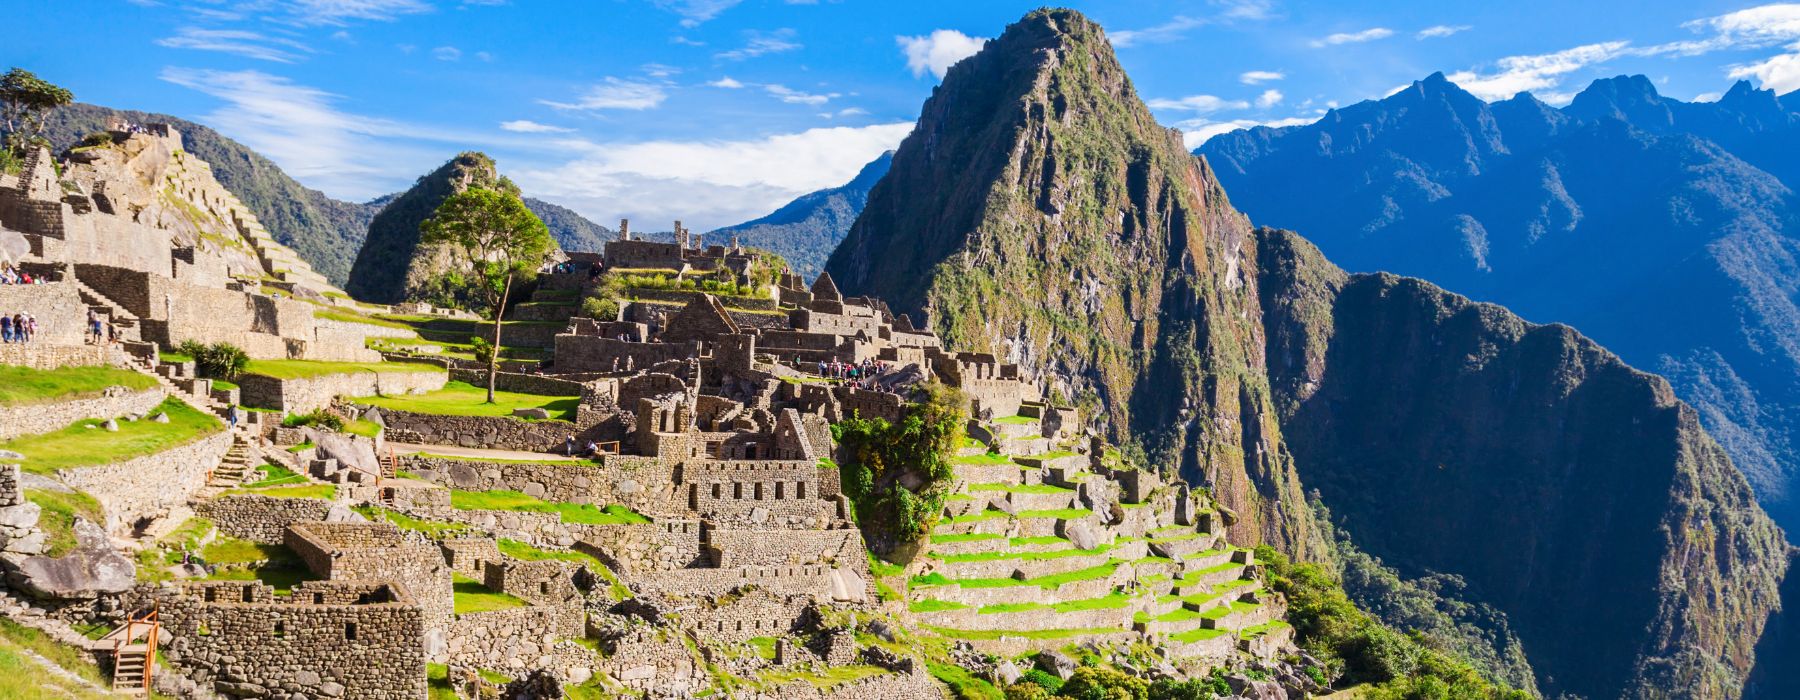 TREKS TO MACHU PICCHU: WHICH ARE TO CHOOSE?